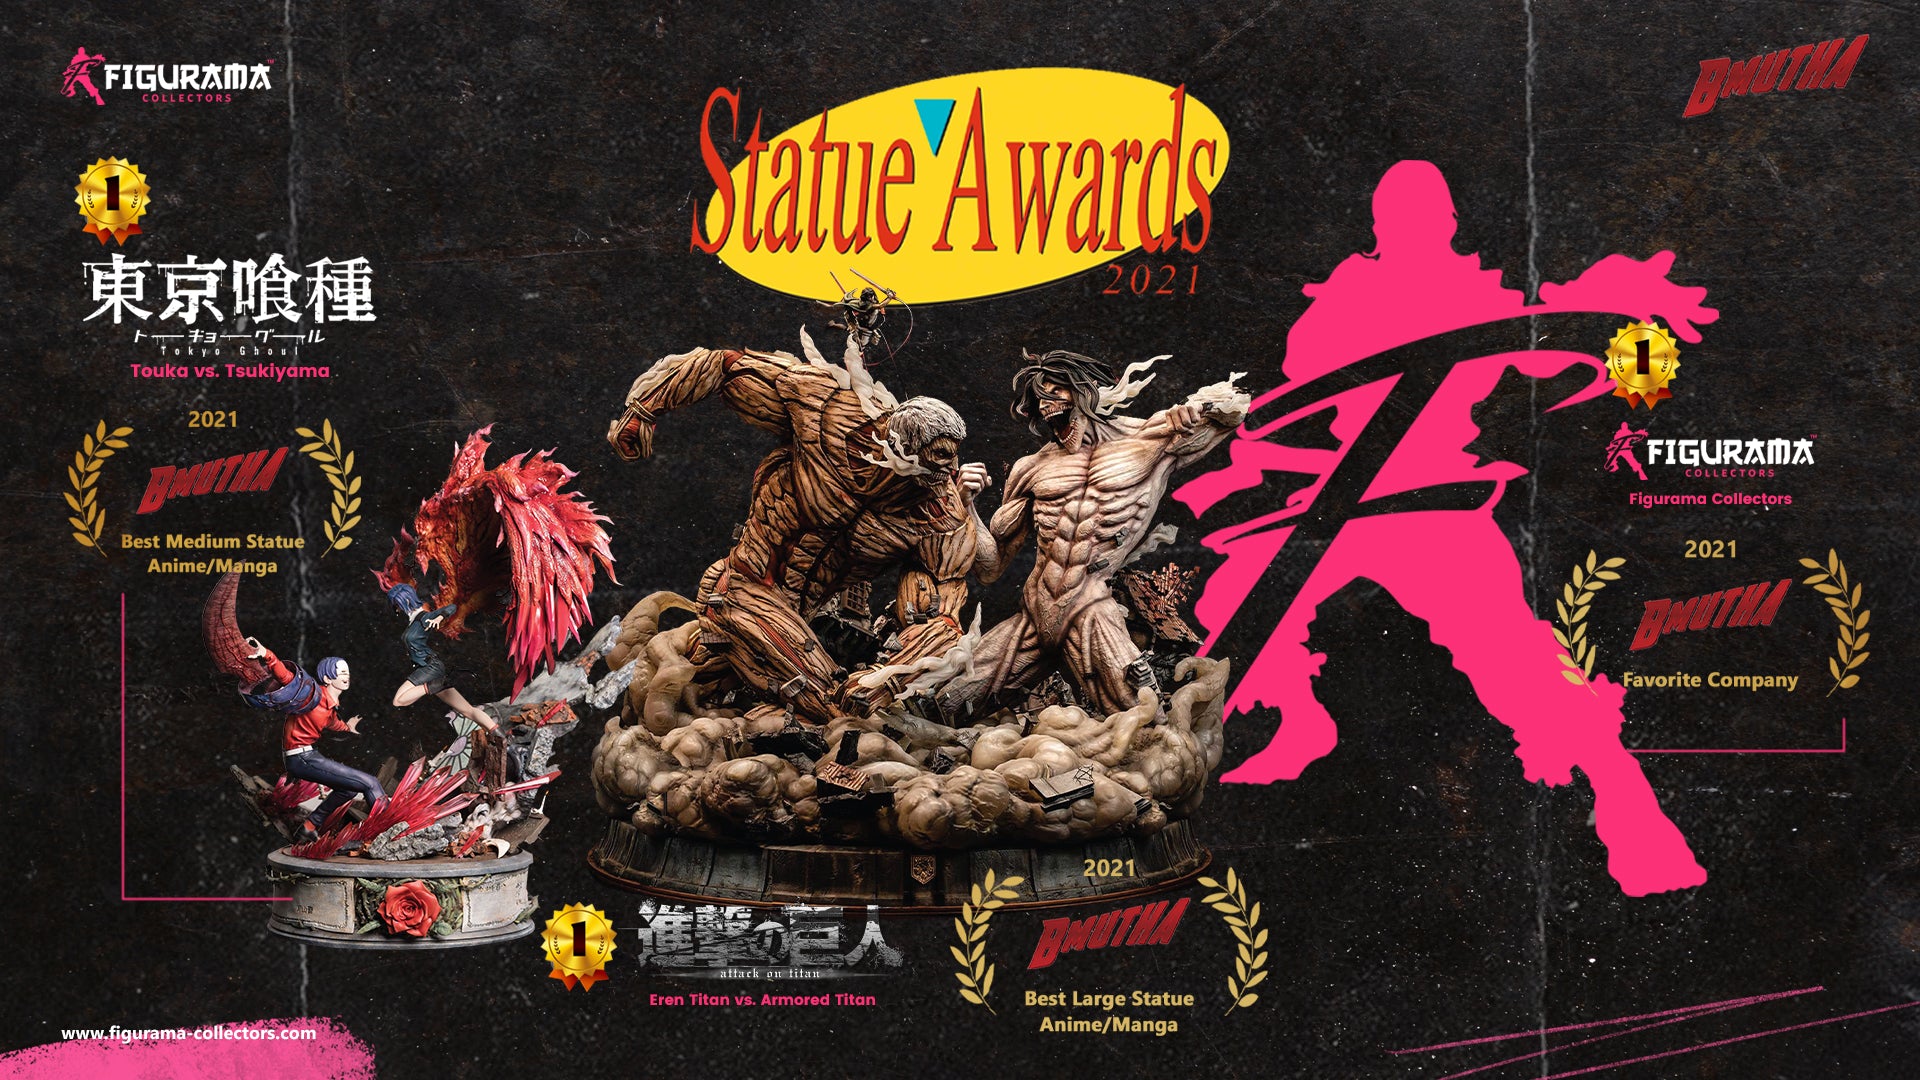 🏆🥇 FIGURAMA COLLECTORS SNATCHES 1st PLACE x3 AT BMUTHA STATUE AWARDS 🥇🏆